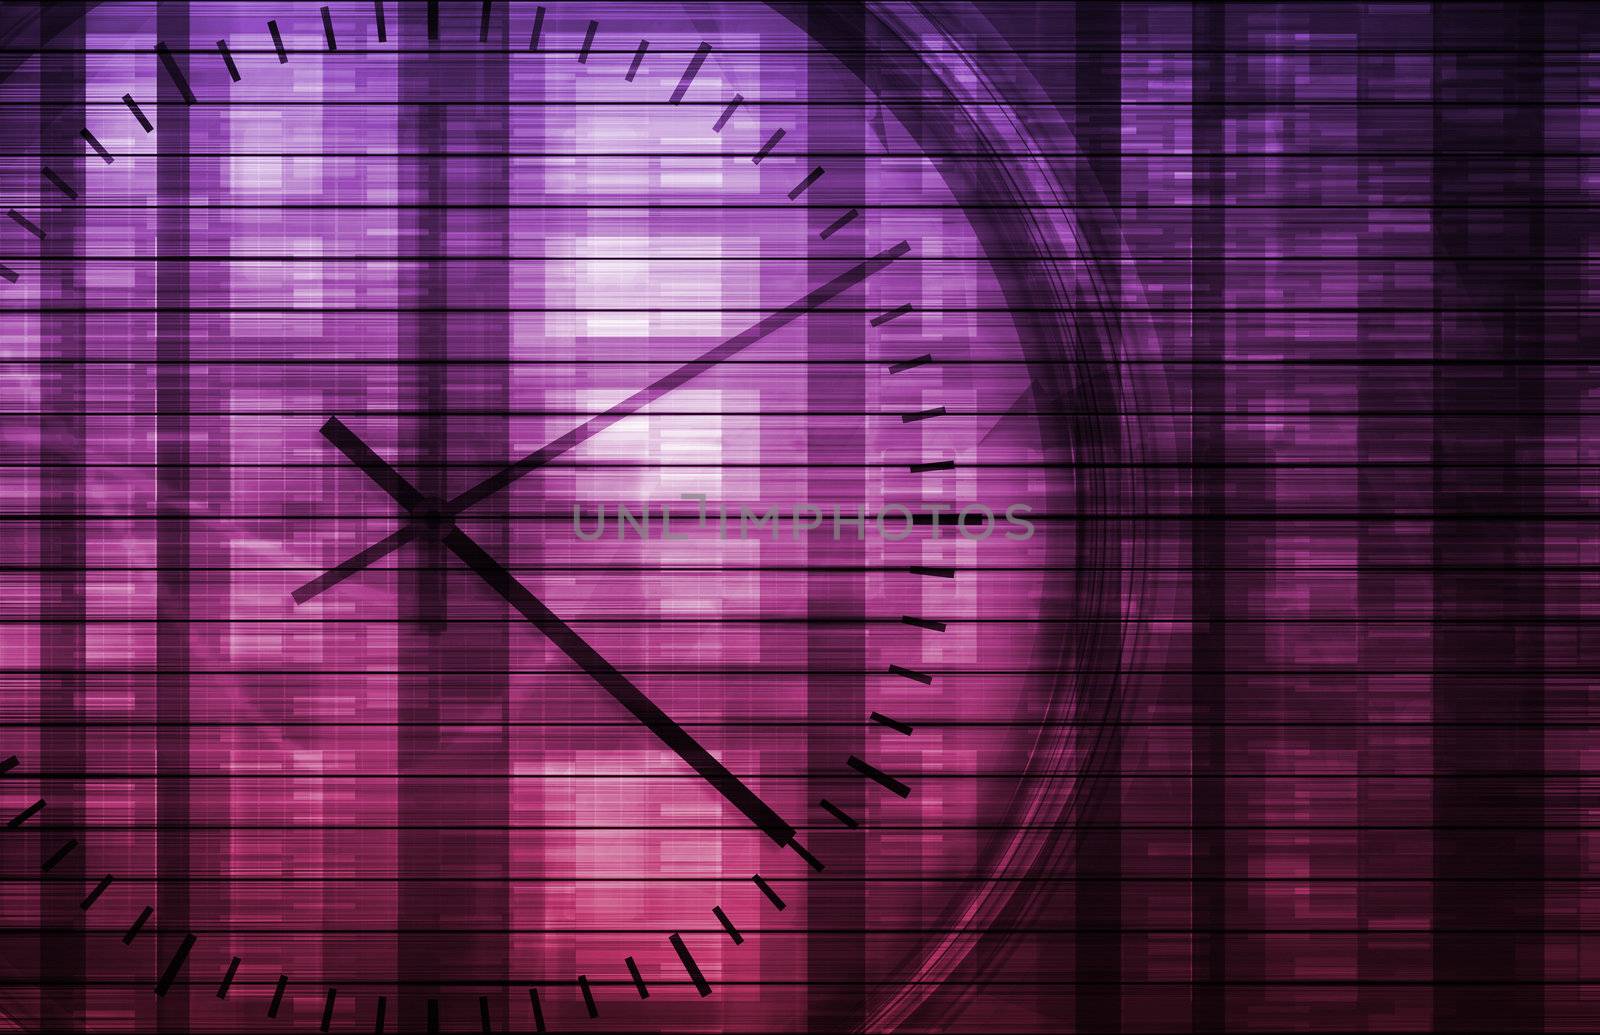 Time Management Concept as a Abstract Background